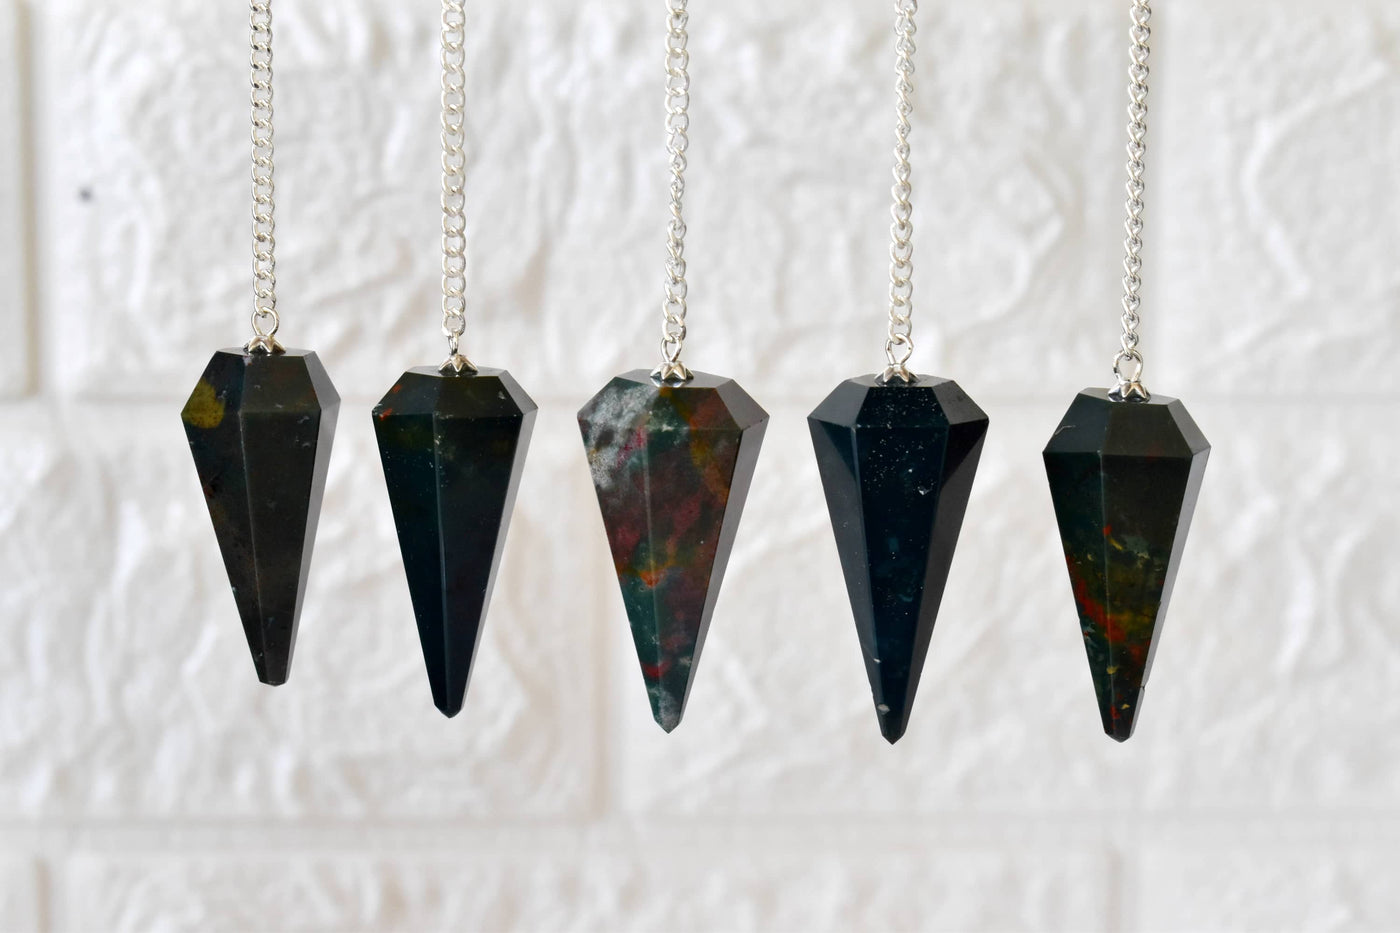 Bloodstone Pendulum (Protection and Strength)